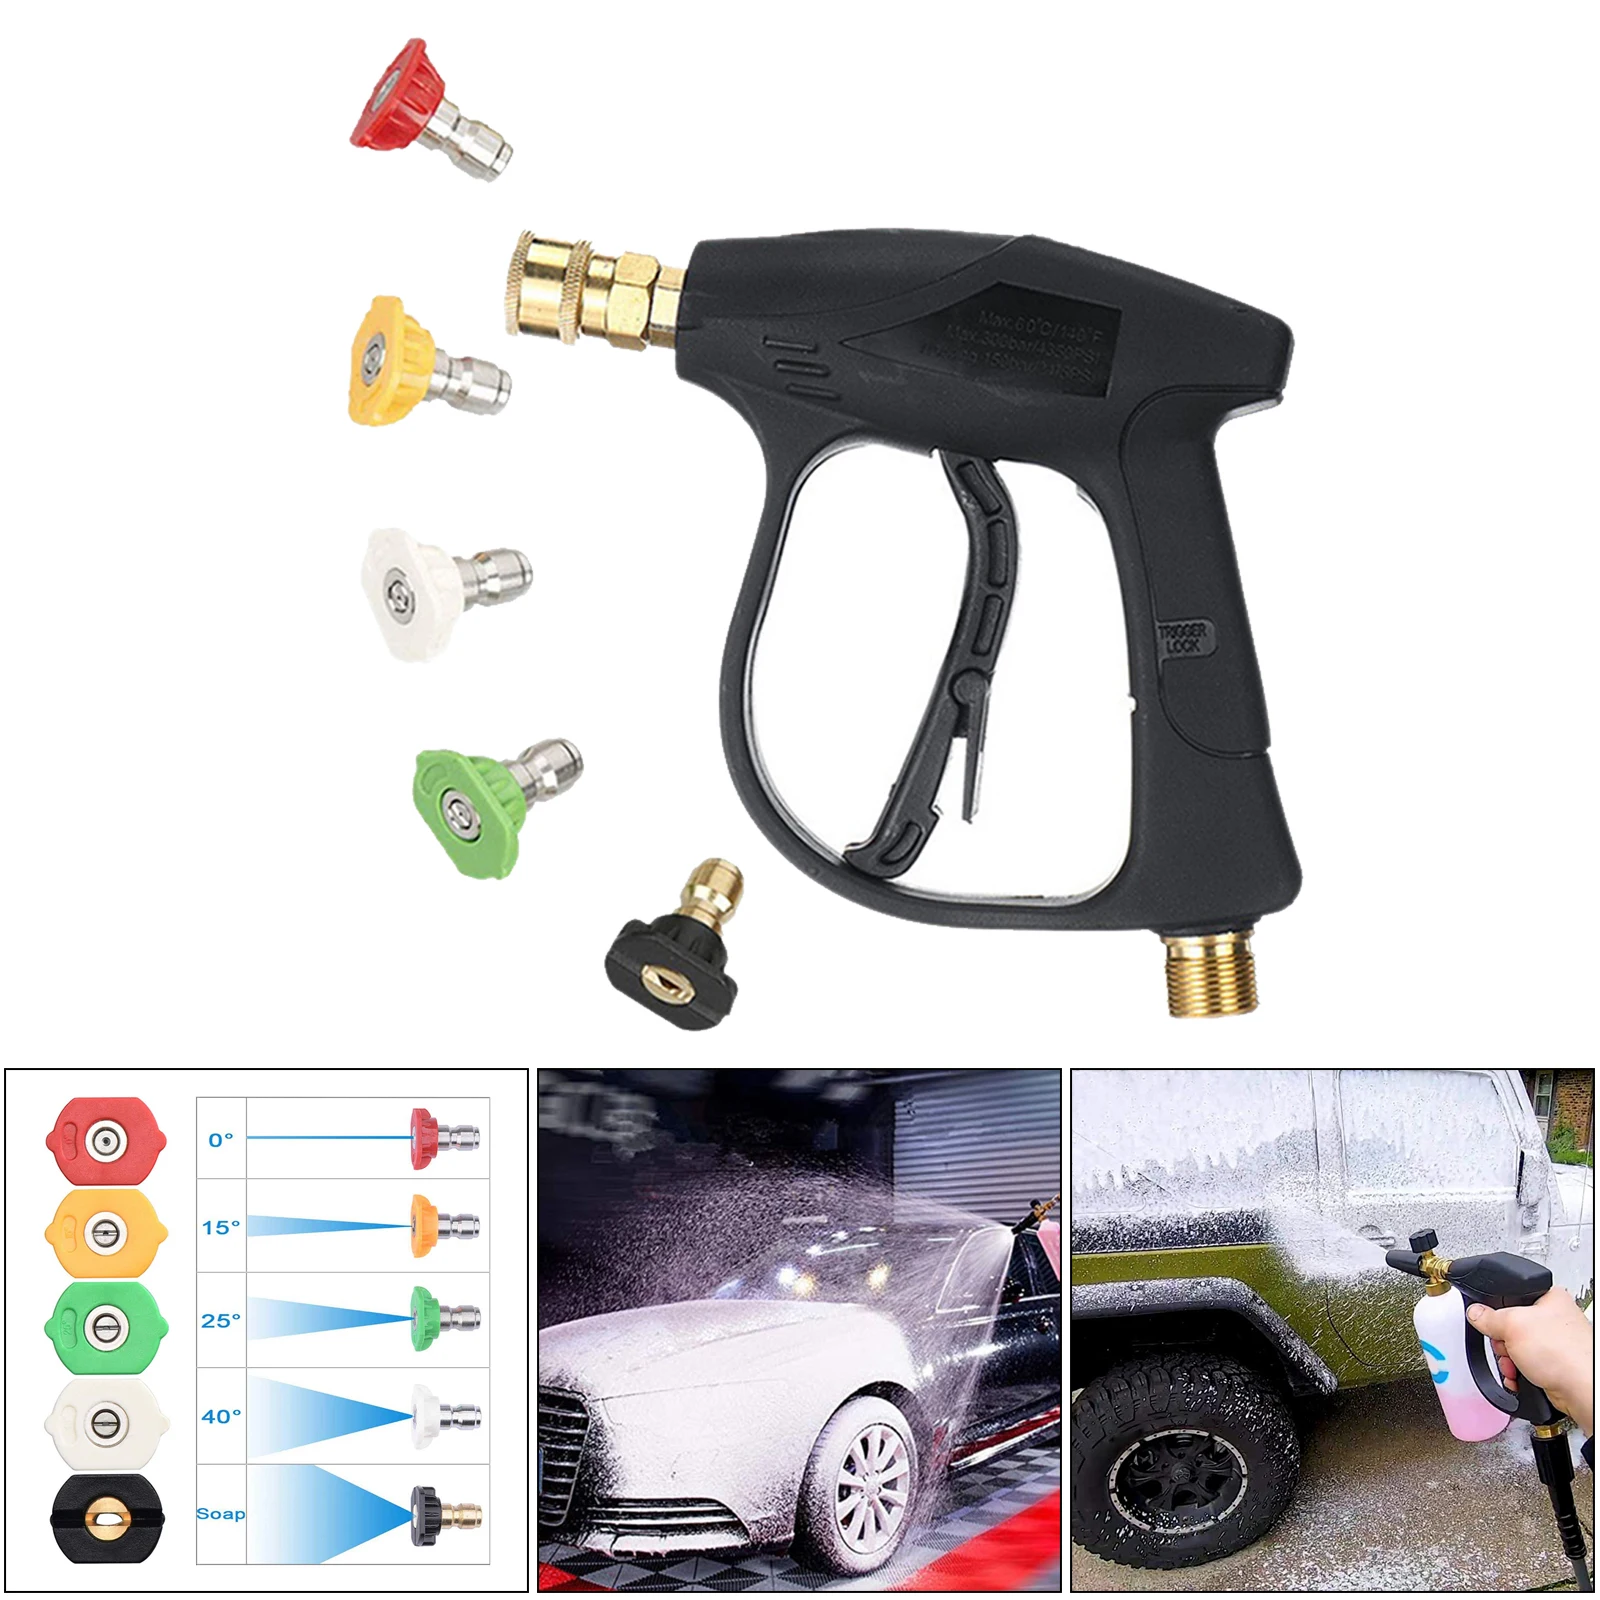 High Pressure Washer Gun 5000 PSI, Replacement for Hot and Cold Water, Pressure Washer Swivel Fitting, 5 Nozzle Tips